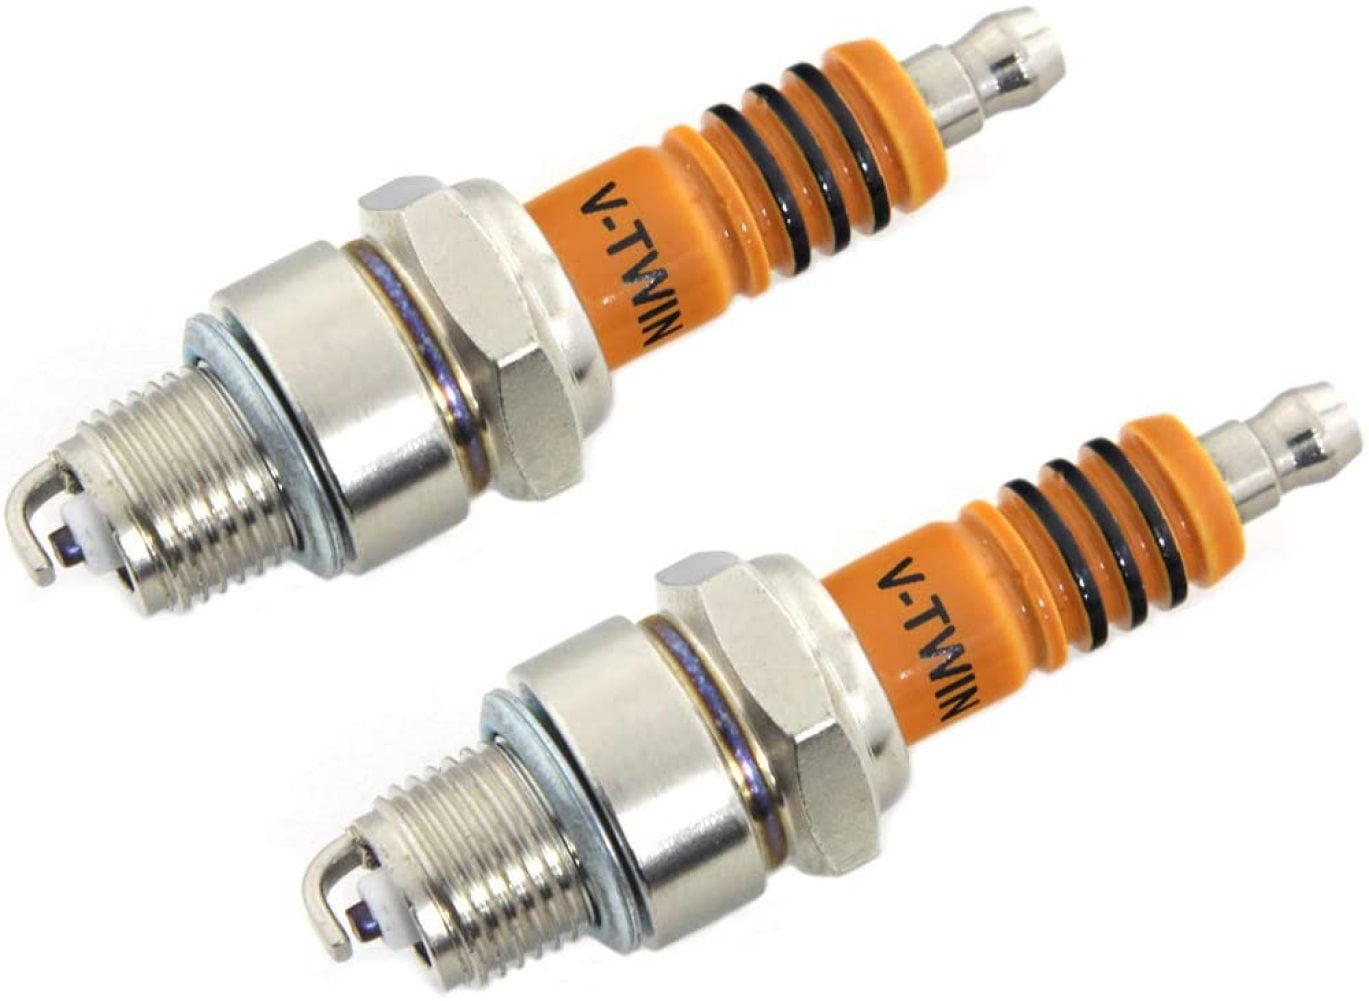 V-Twin Performance Spark Plugs Replaces Harley spark plug #6R12.